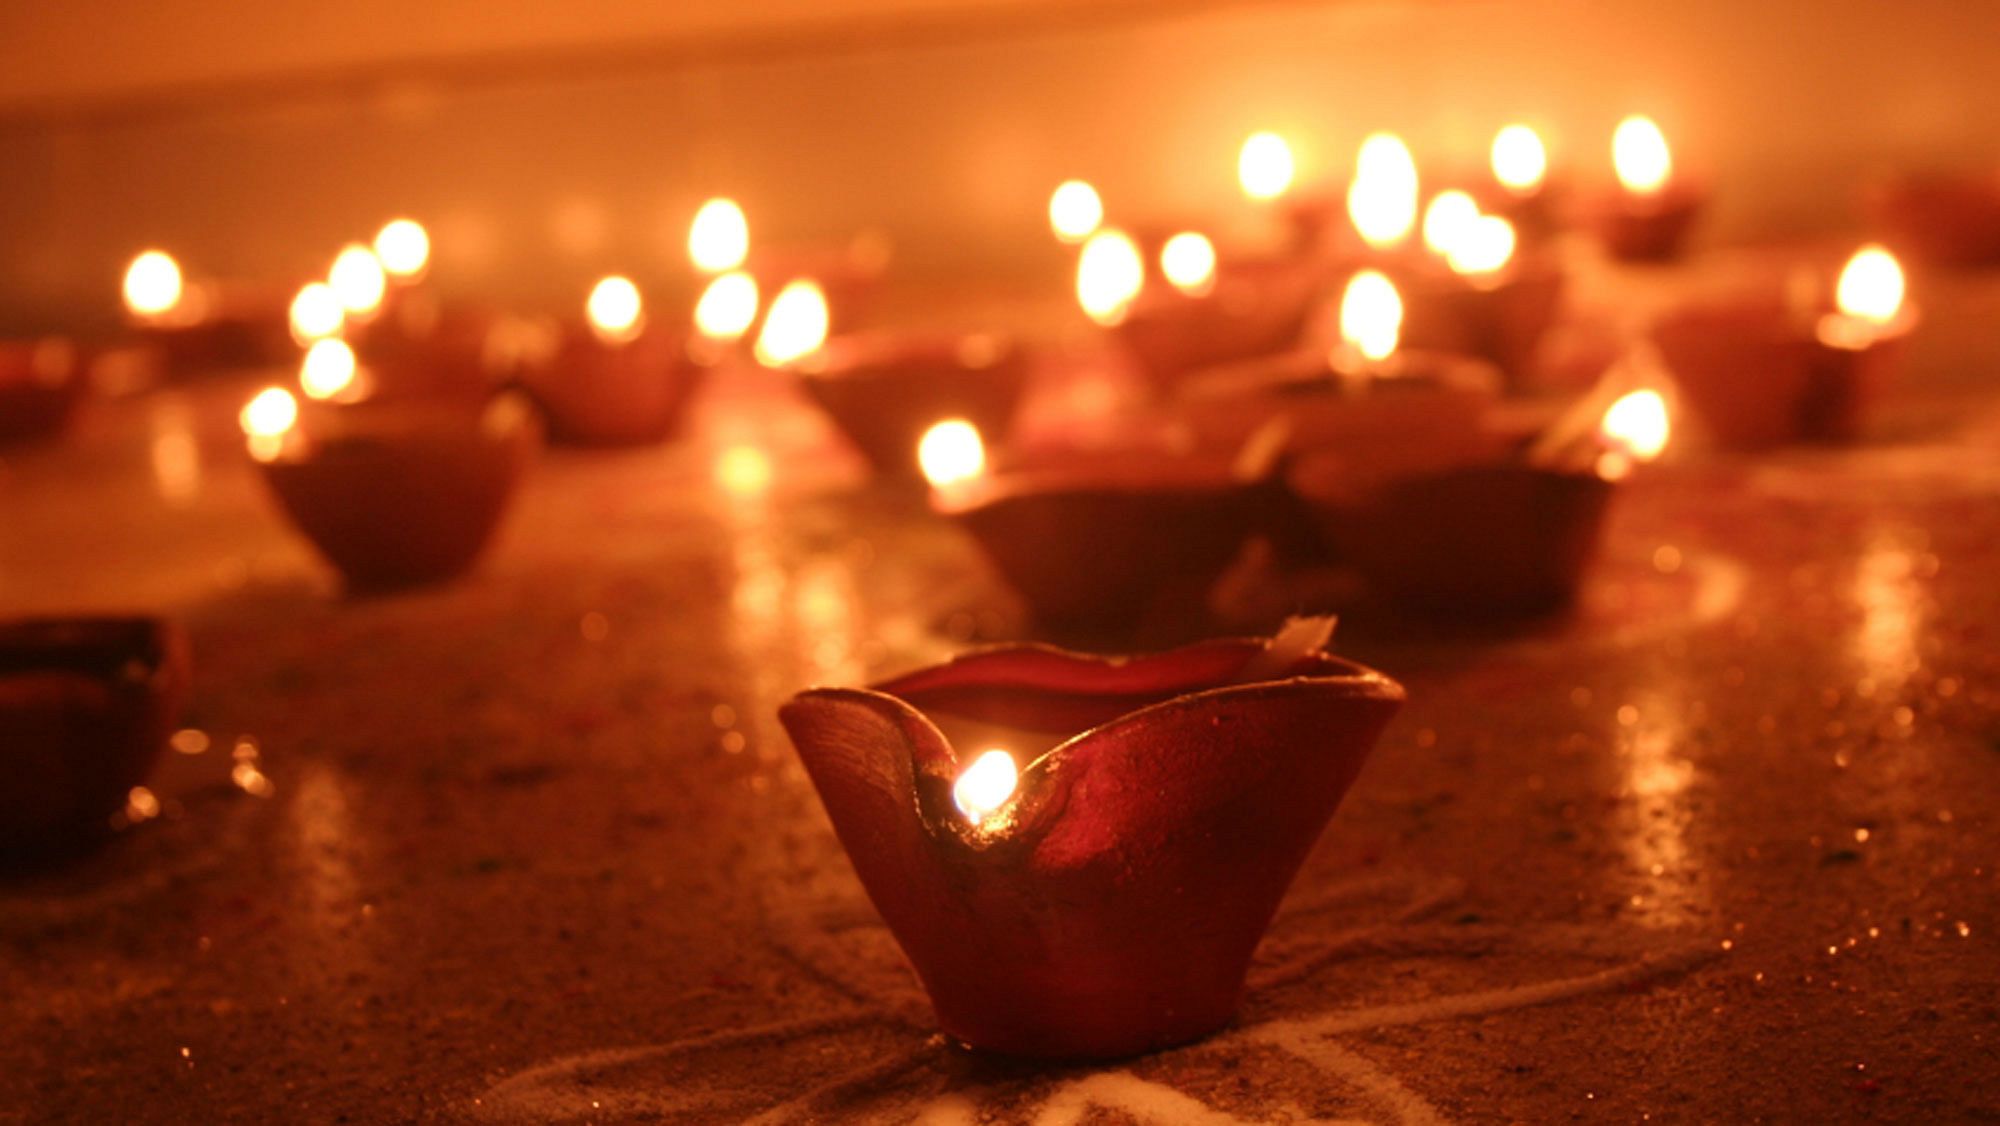 This Diwali, look to alternative gifting options that are not only unusual but also healthy.